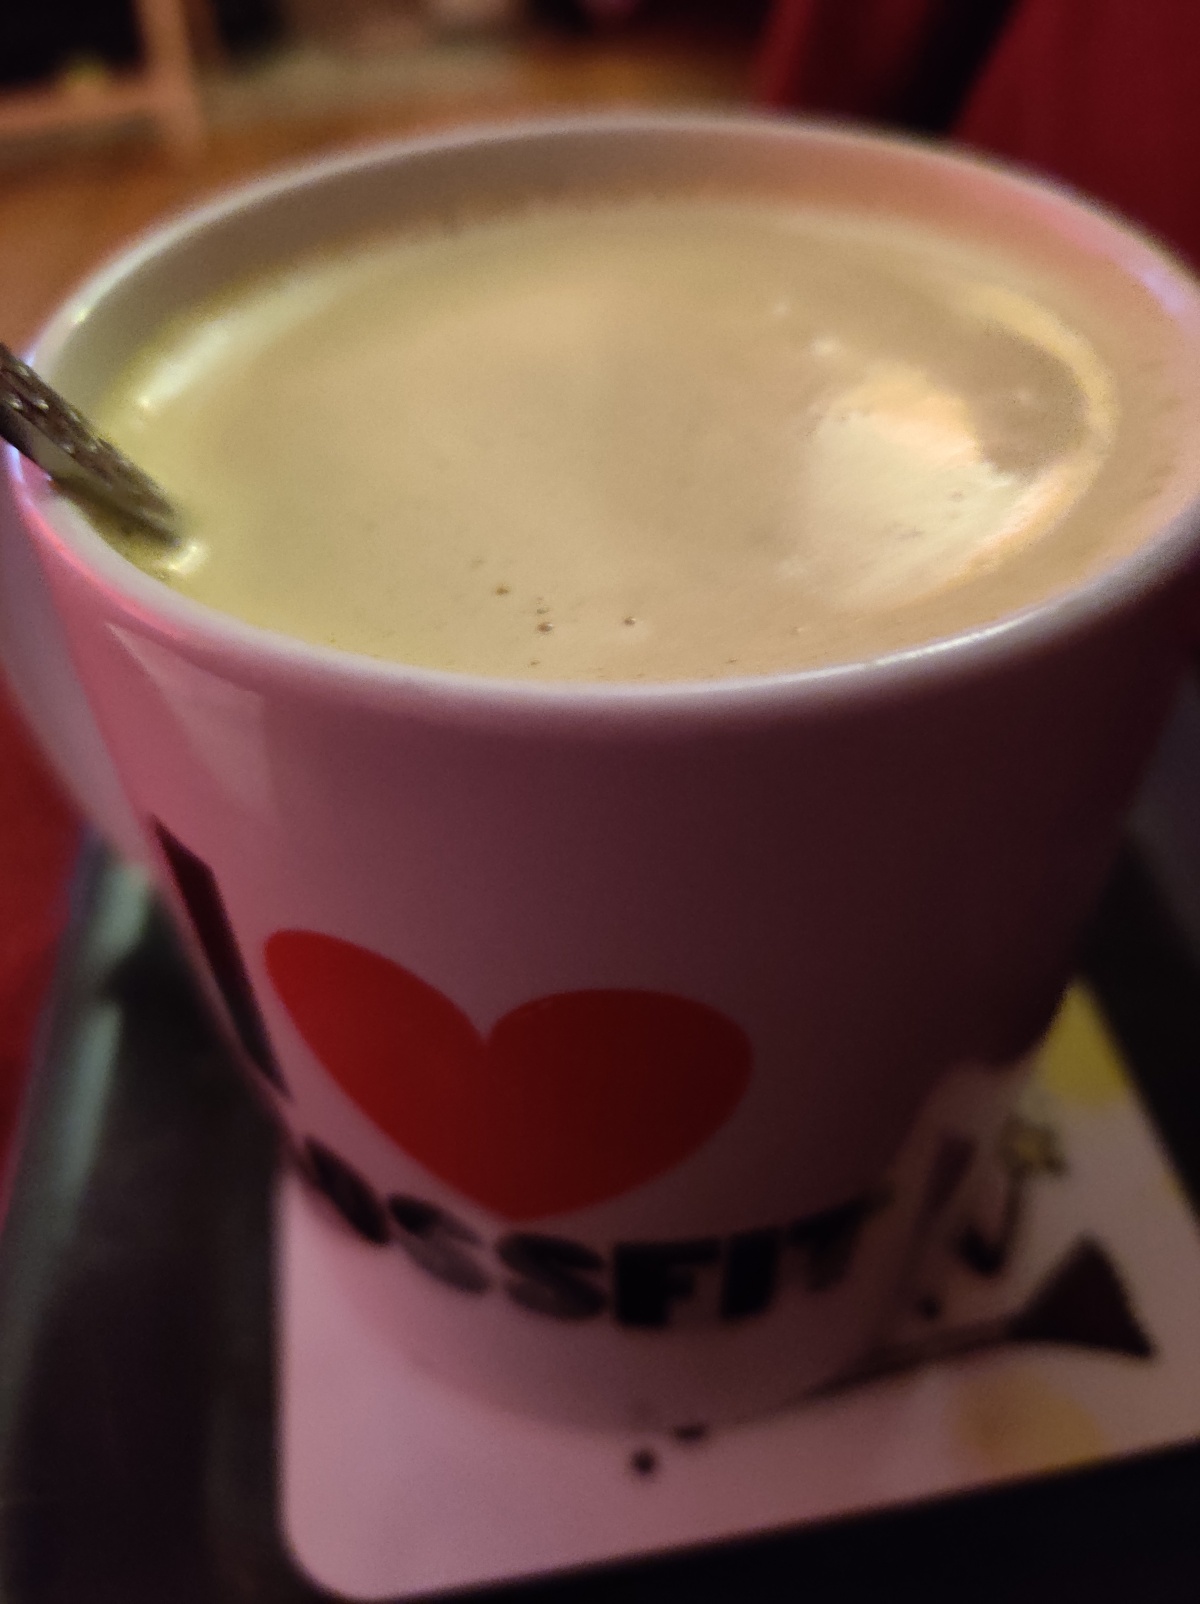 Tumeric latte – cheap and quick homemade version